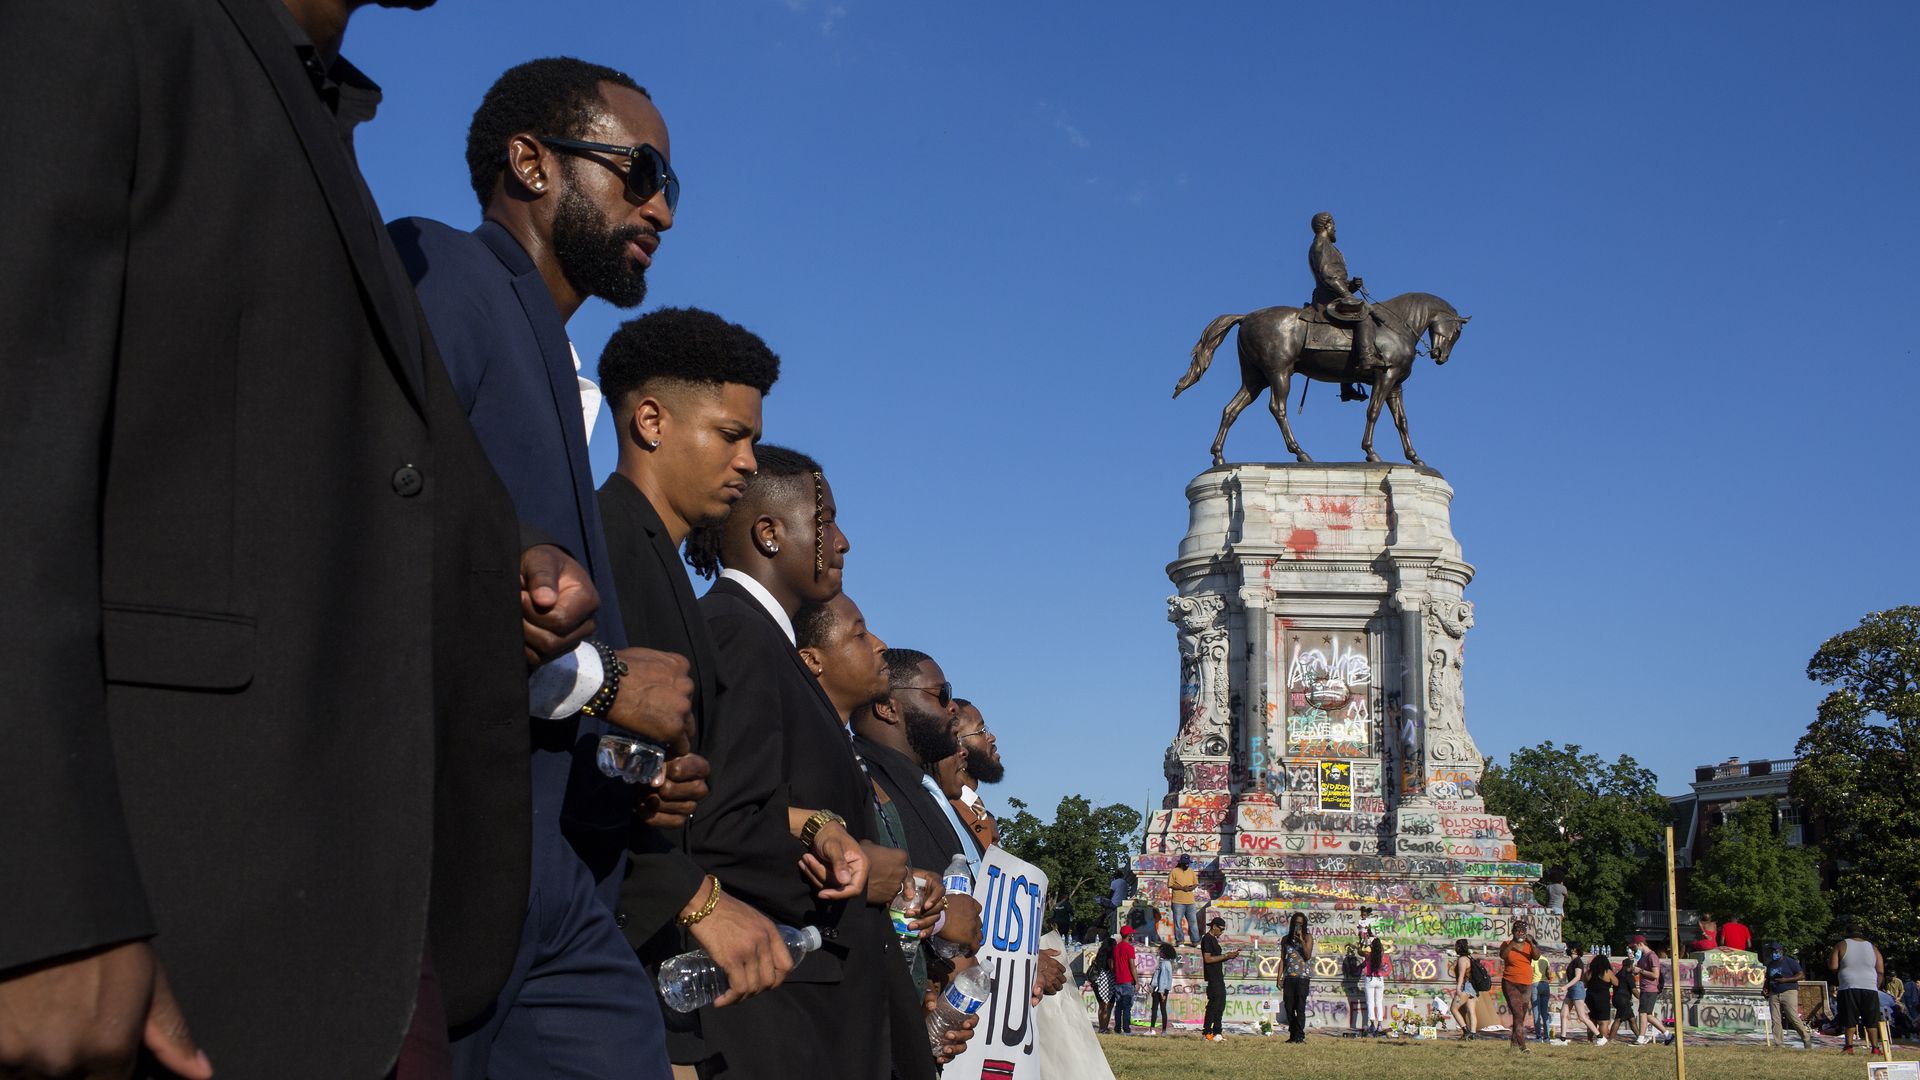 Black Lives Matter activists occupy the traffic circle underneath the statue of Confederate General Robert Lee, now covered in graffiti, on June 13, 2020 at Monument Avenue in Richmond, Virginia. 